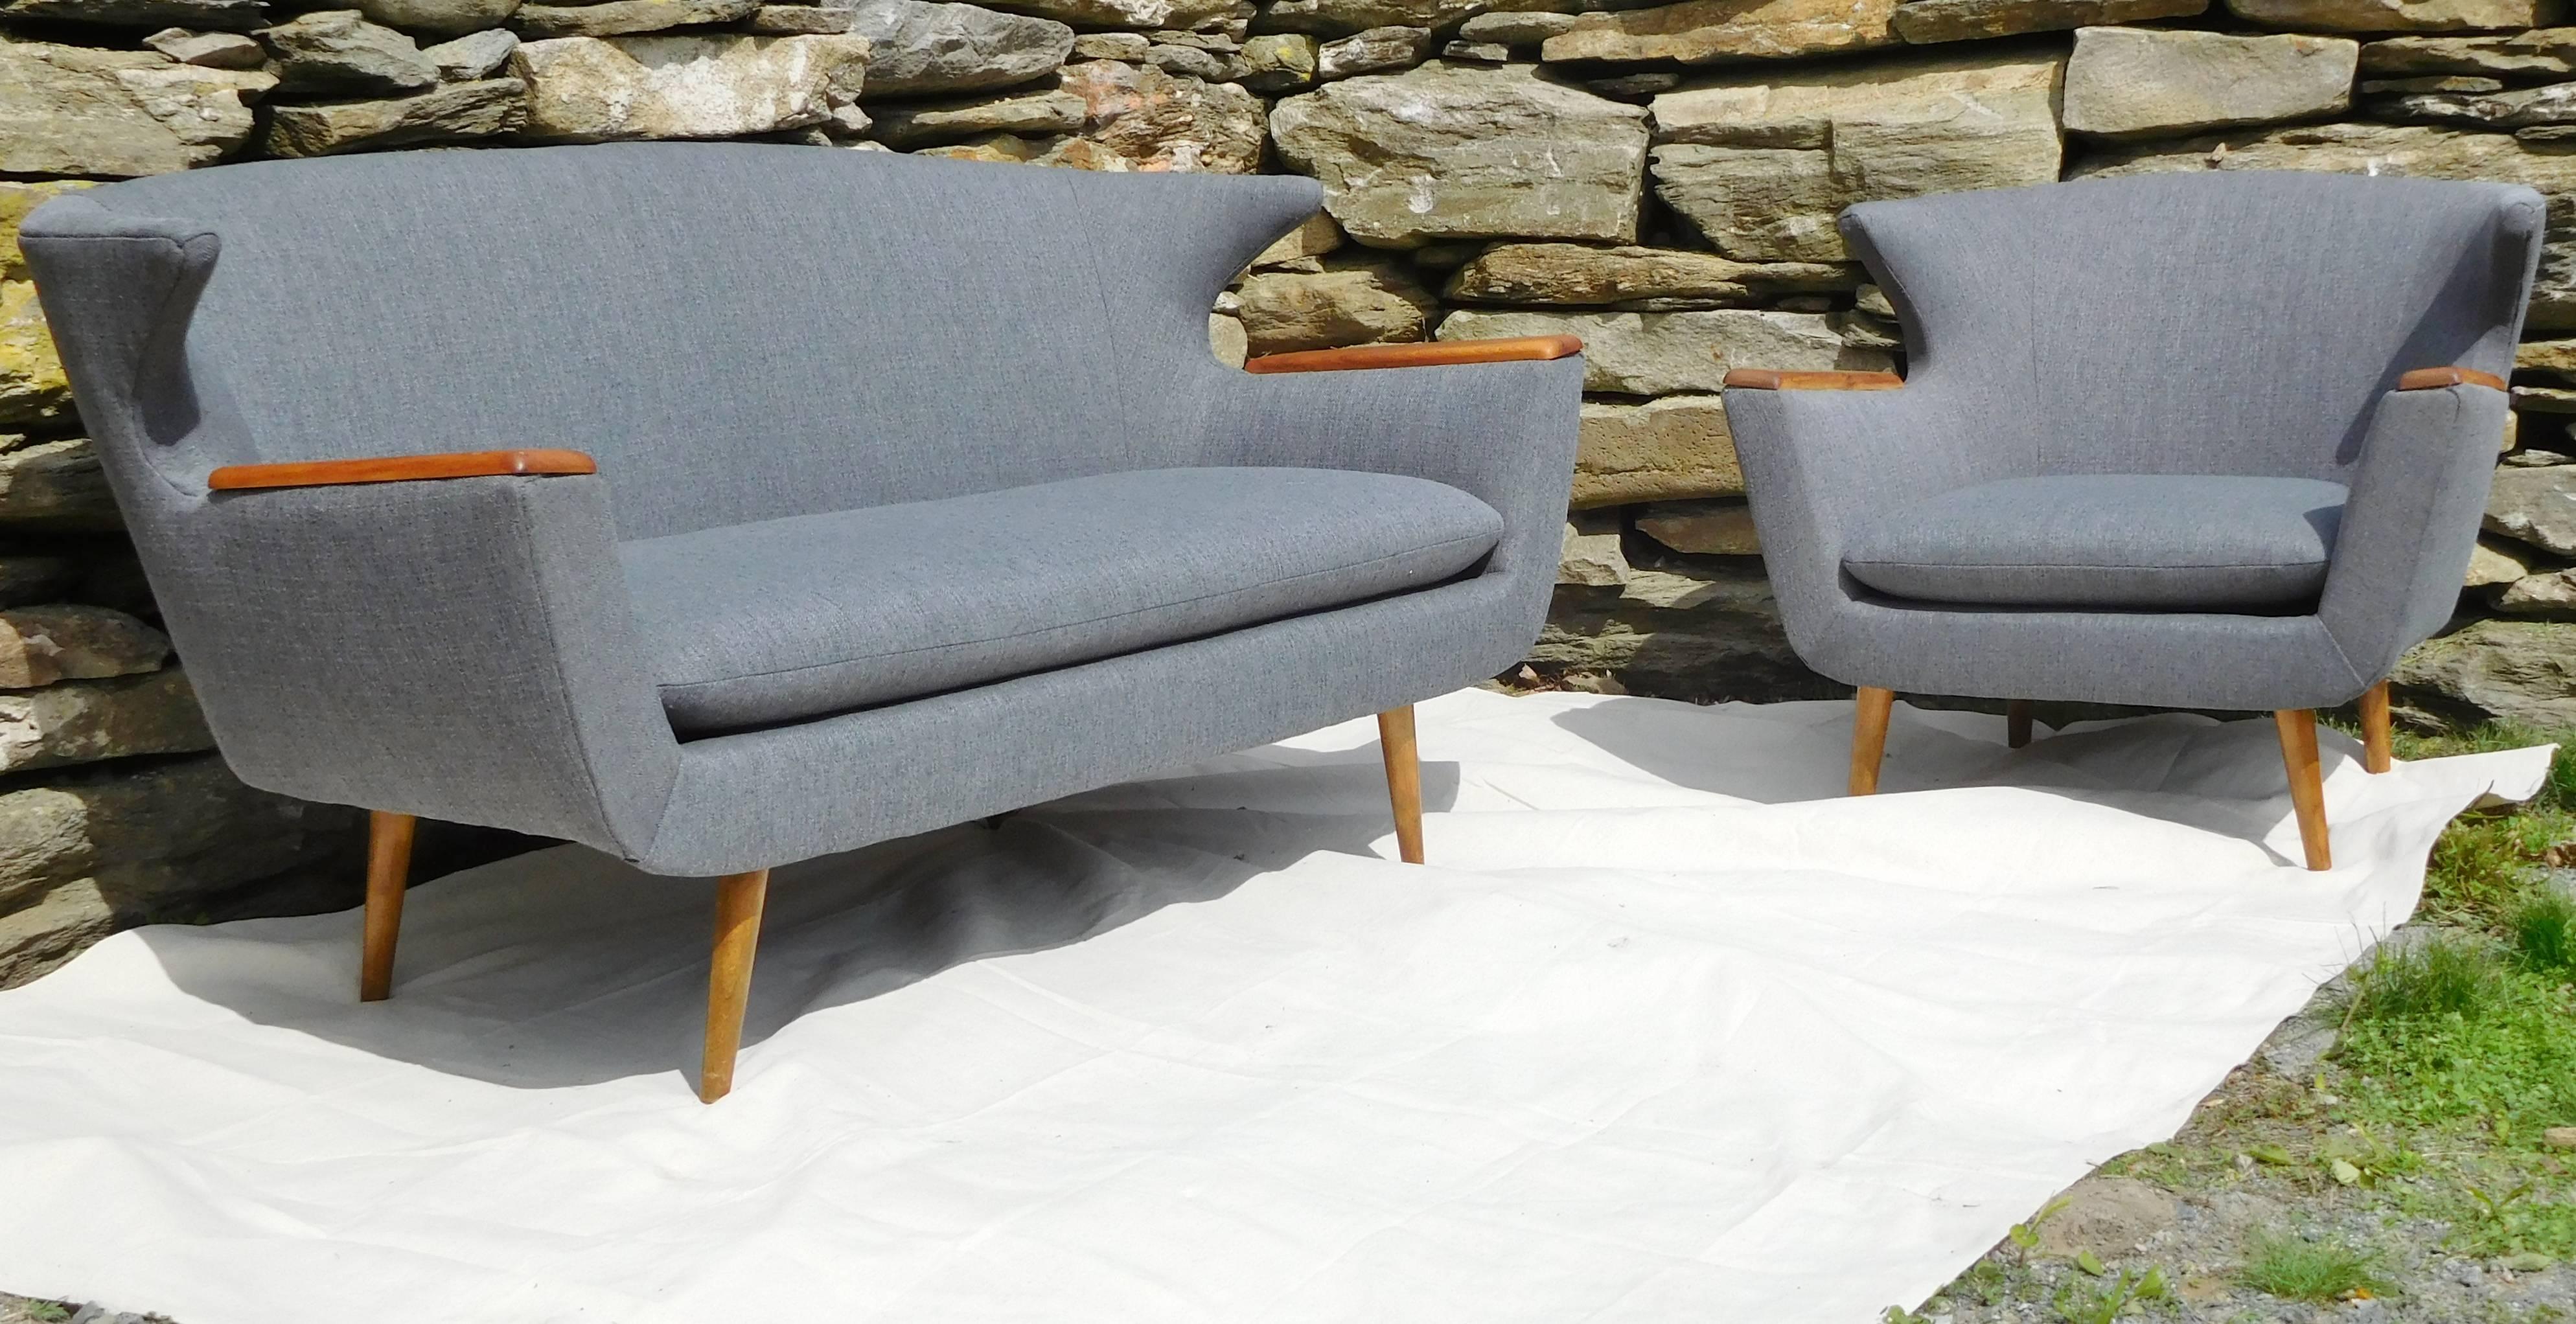 This two-piece set in sleek minimalist design has been reconditioned with new ash-grey fabric upholstery. The wing-backs and overall look are reminiscent of furniture by Hans-Erik Johansson, Kerstin Horlin-Holmquist, Hans Wegner, or Folke Jansson in